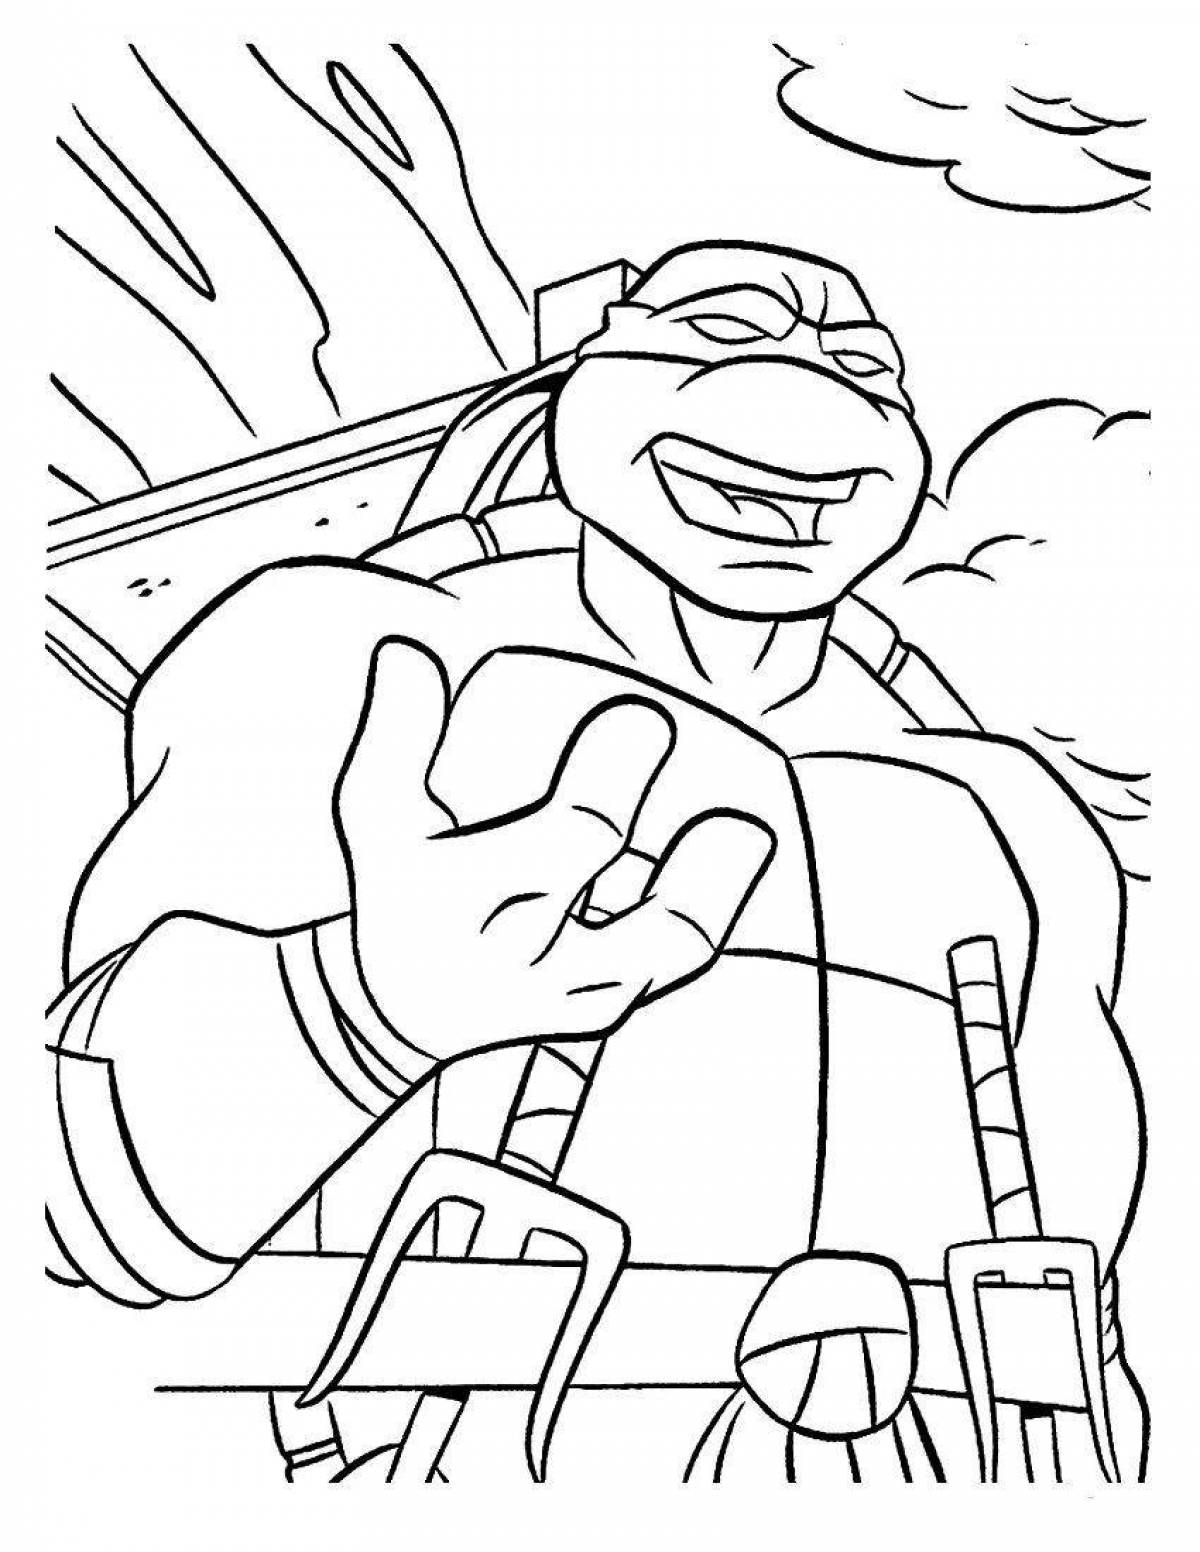 Coloring page nice tortoise raphael